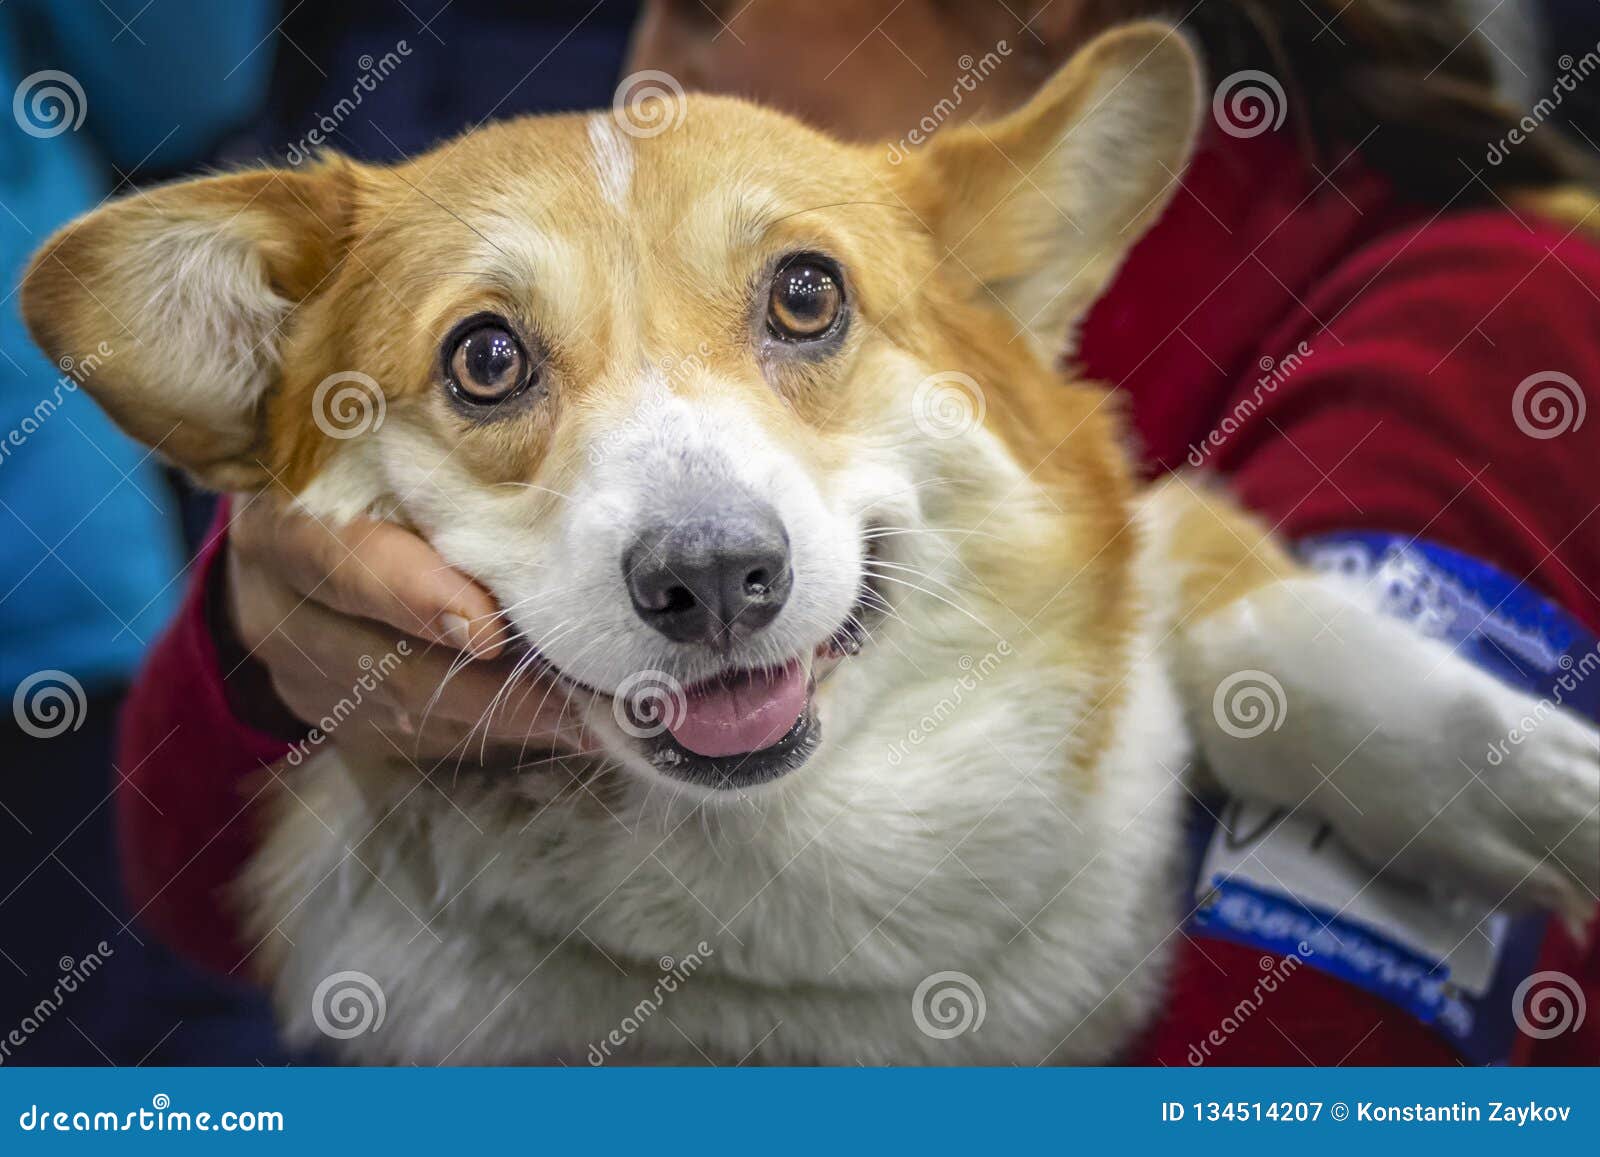 Funny Corgi Dog with Big Ears. Portrait Red Dog on Hands Owner for Poster,  Wallpaper Stock Image - Image of couch, background: 134514207